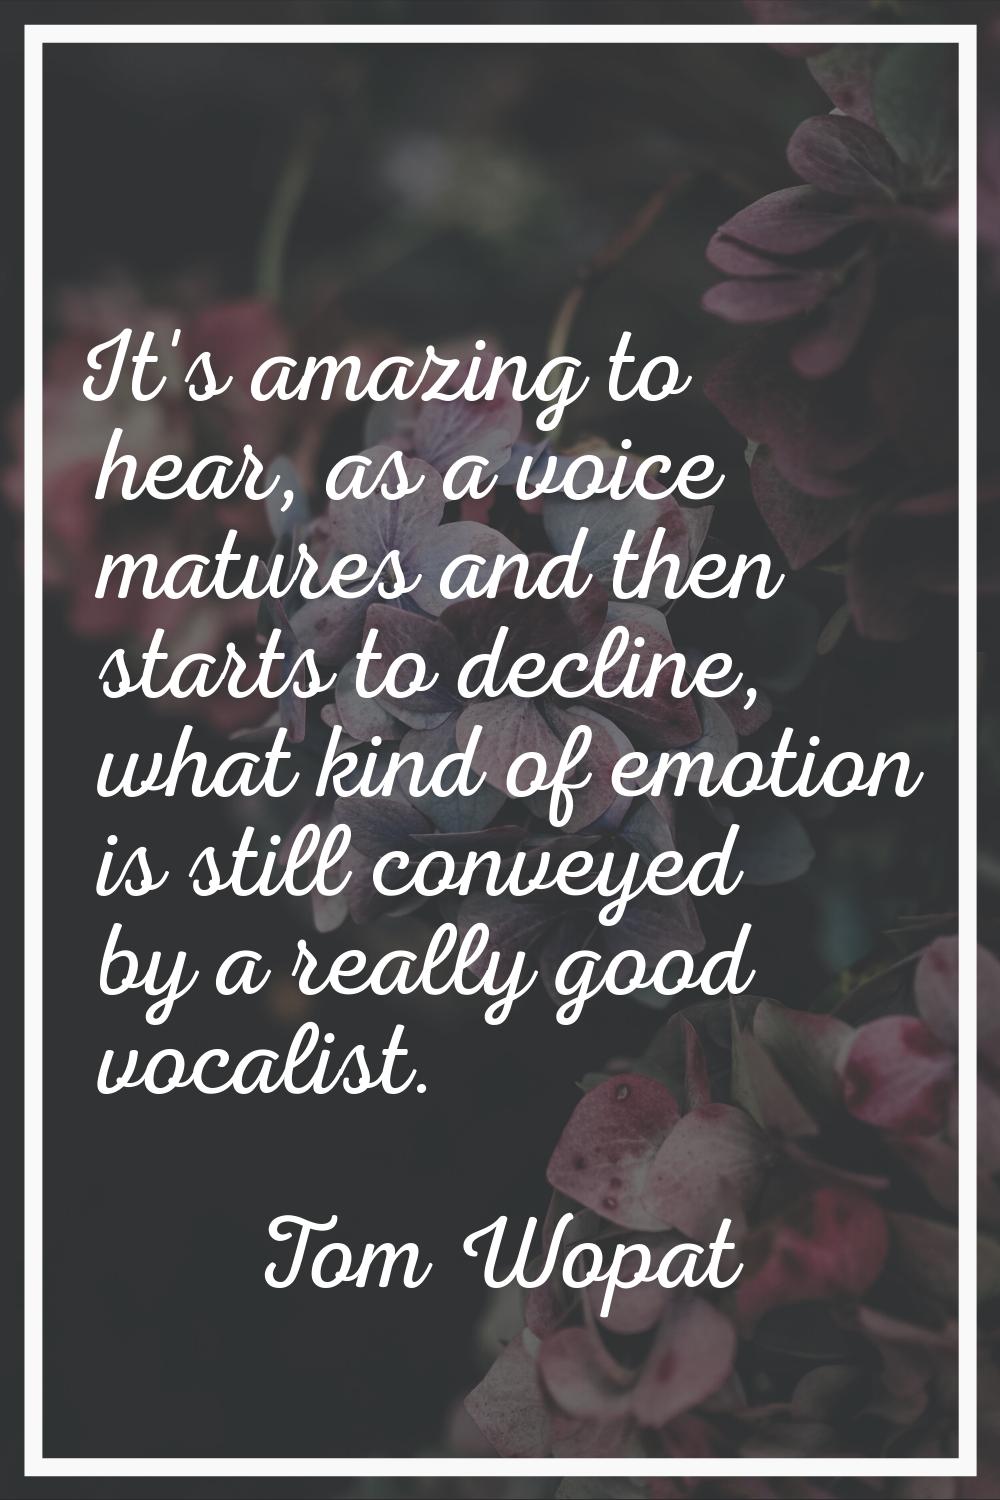 It's amazing to hear, as a voice matures and then starts to decline, what kind of emotion is still 